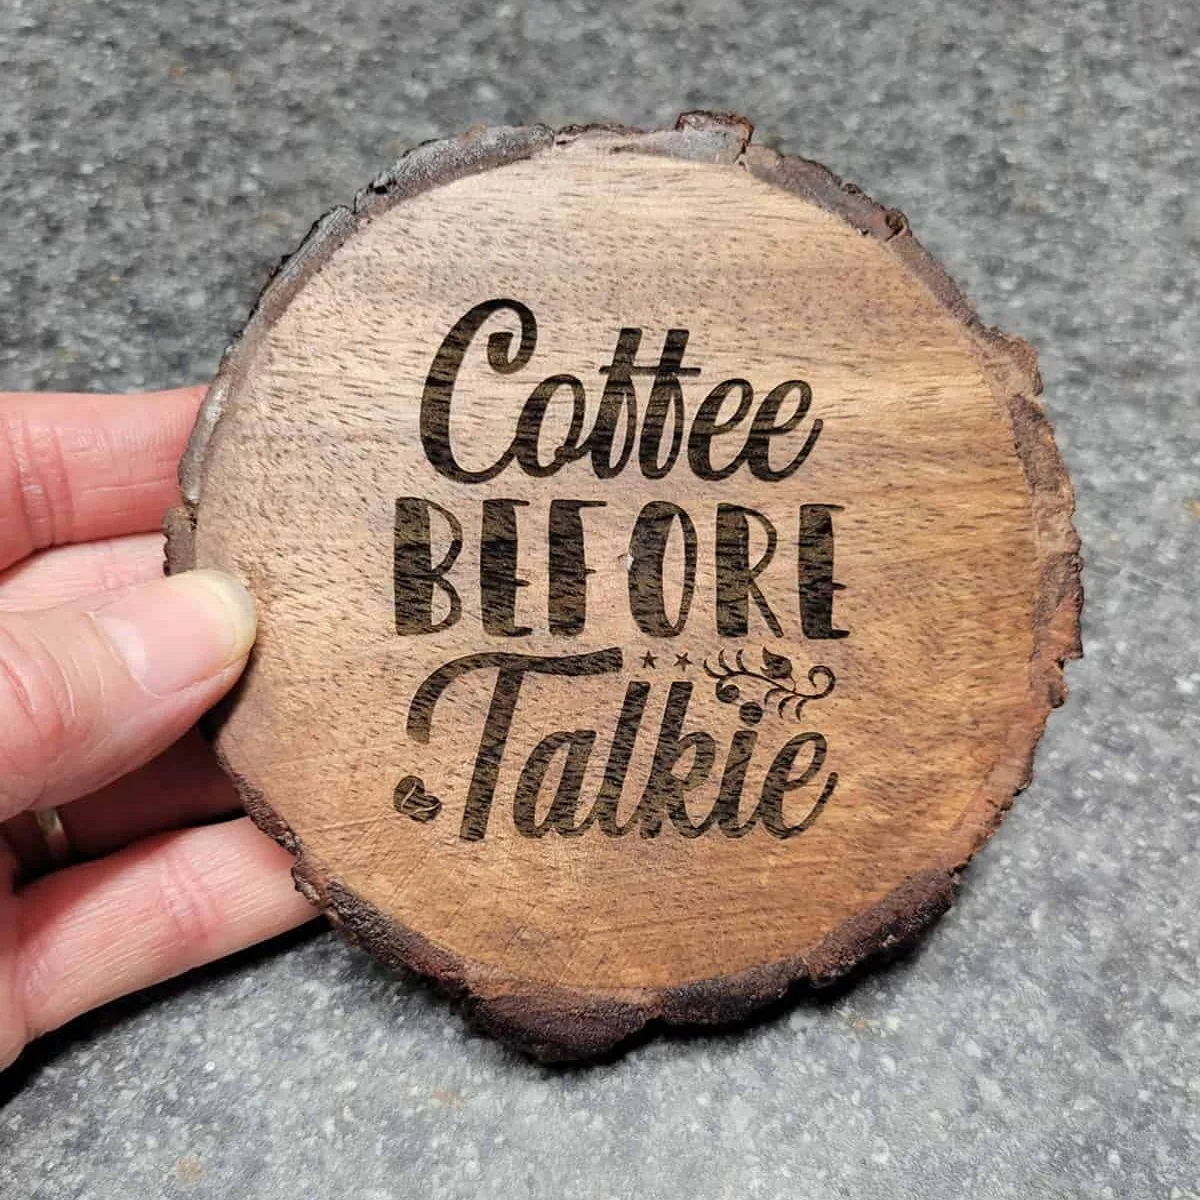 completed laser engraved wood coaster that says "coffee before talkie"